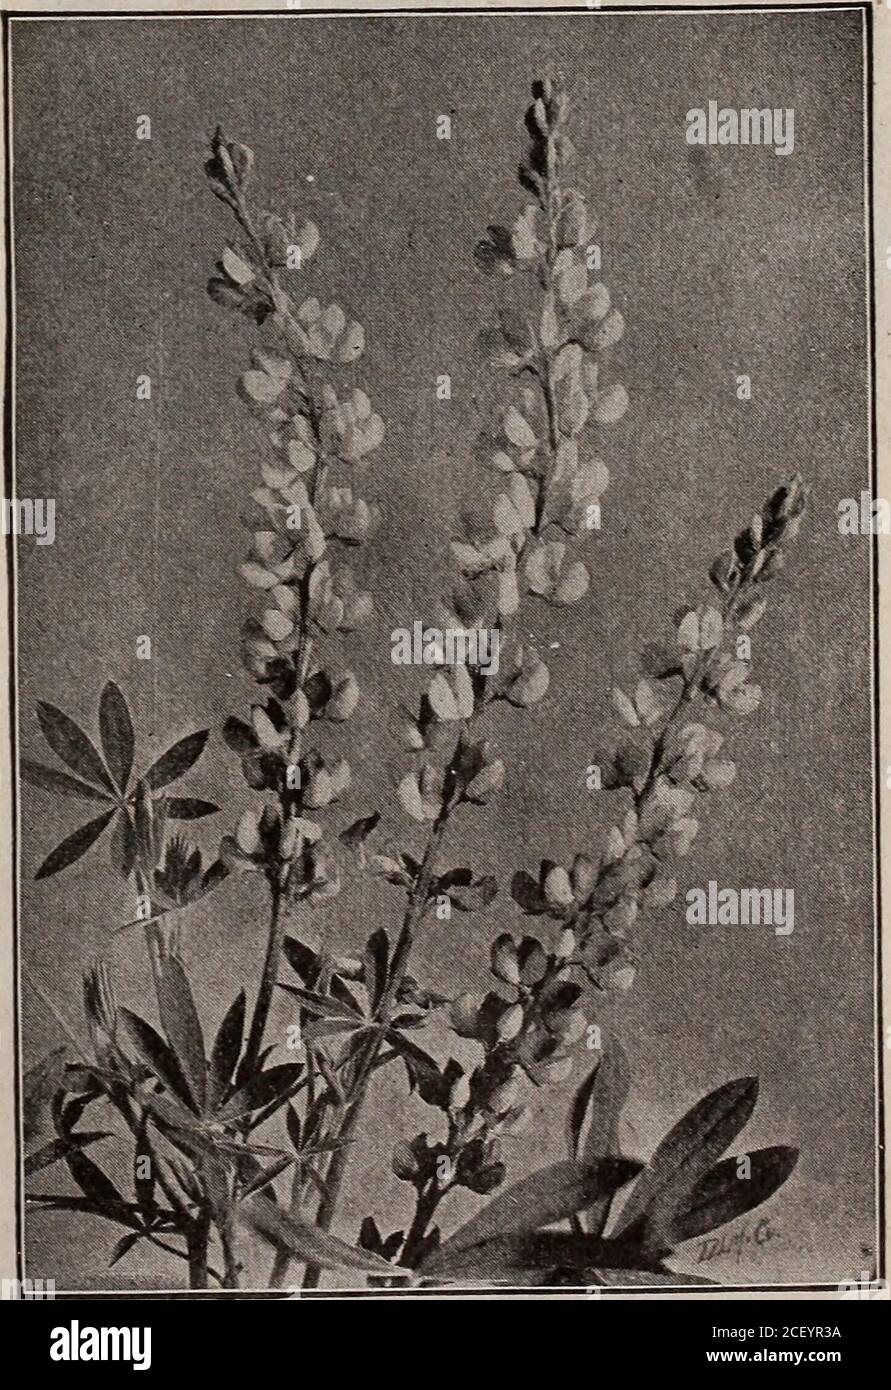 . Seeds, bulbs, shrubs : catalogue 1914. CAMPANULA PERSICIFOLIA CAMPANULA persicifoia (Peach-leaved CanterburyBell). H. P. 2 to 3 ft. Valuable for border decoration andfor cut flowers. They throw up slender stems which fromJuly are clothed withbell-shaped flowers in shades of blueand white. 2584 Persicifolia alba. White, 2 ft. Pkt., 10c.2589 Persicifolia coerulea. Blue, 2 ft. Pkt., 10c.. LUPINUS POLYPHYLLUS 3201 LUPINUS Polyphyllus. H. P. 2 to 3 ft. Plants suit-able for the hardy border, and very useful decorator.The tall spikes are well clothed with violet-blue flow-ers. Pkt.. Sc. 3238 LOBELI Stock Photo